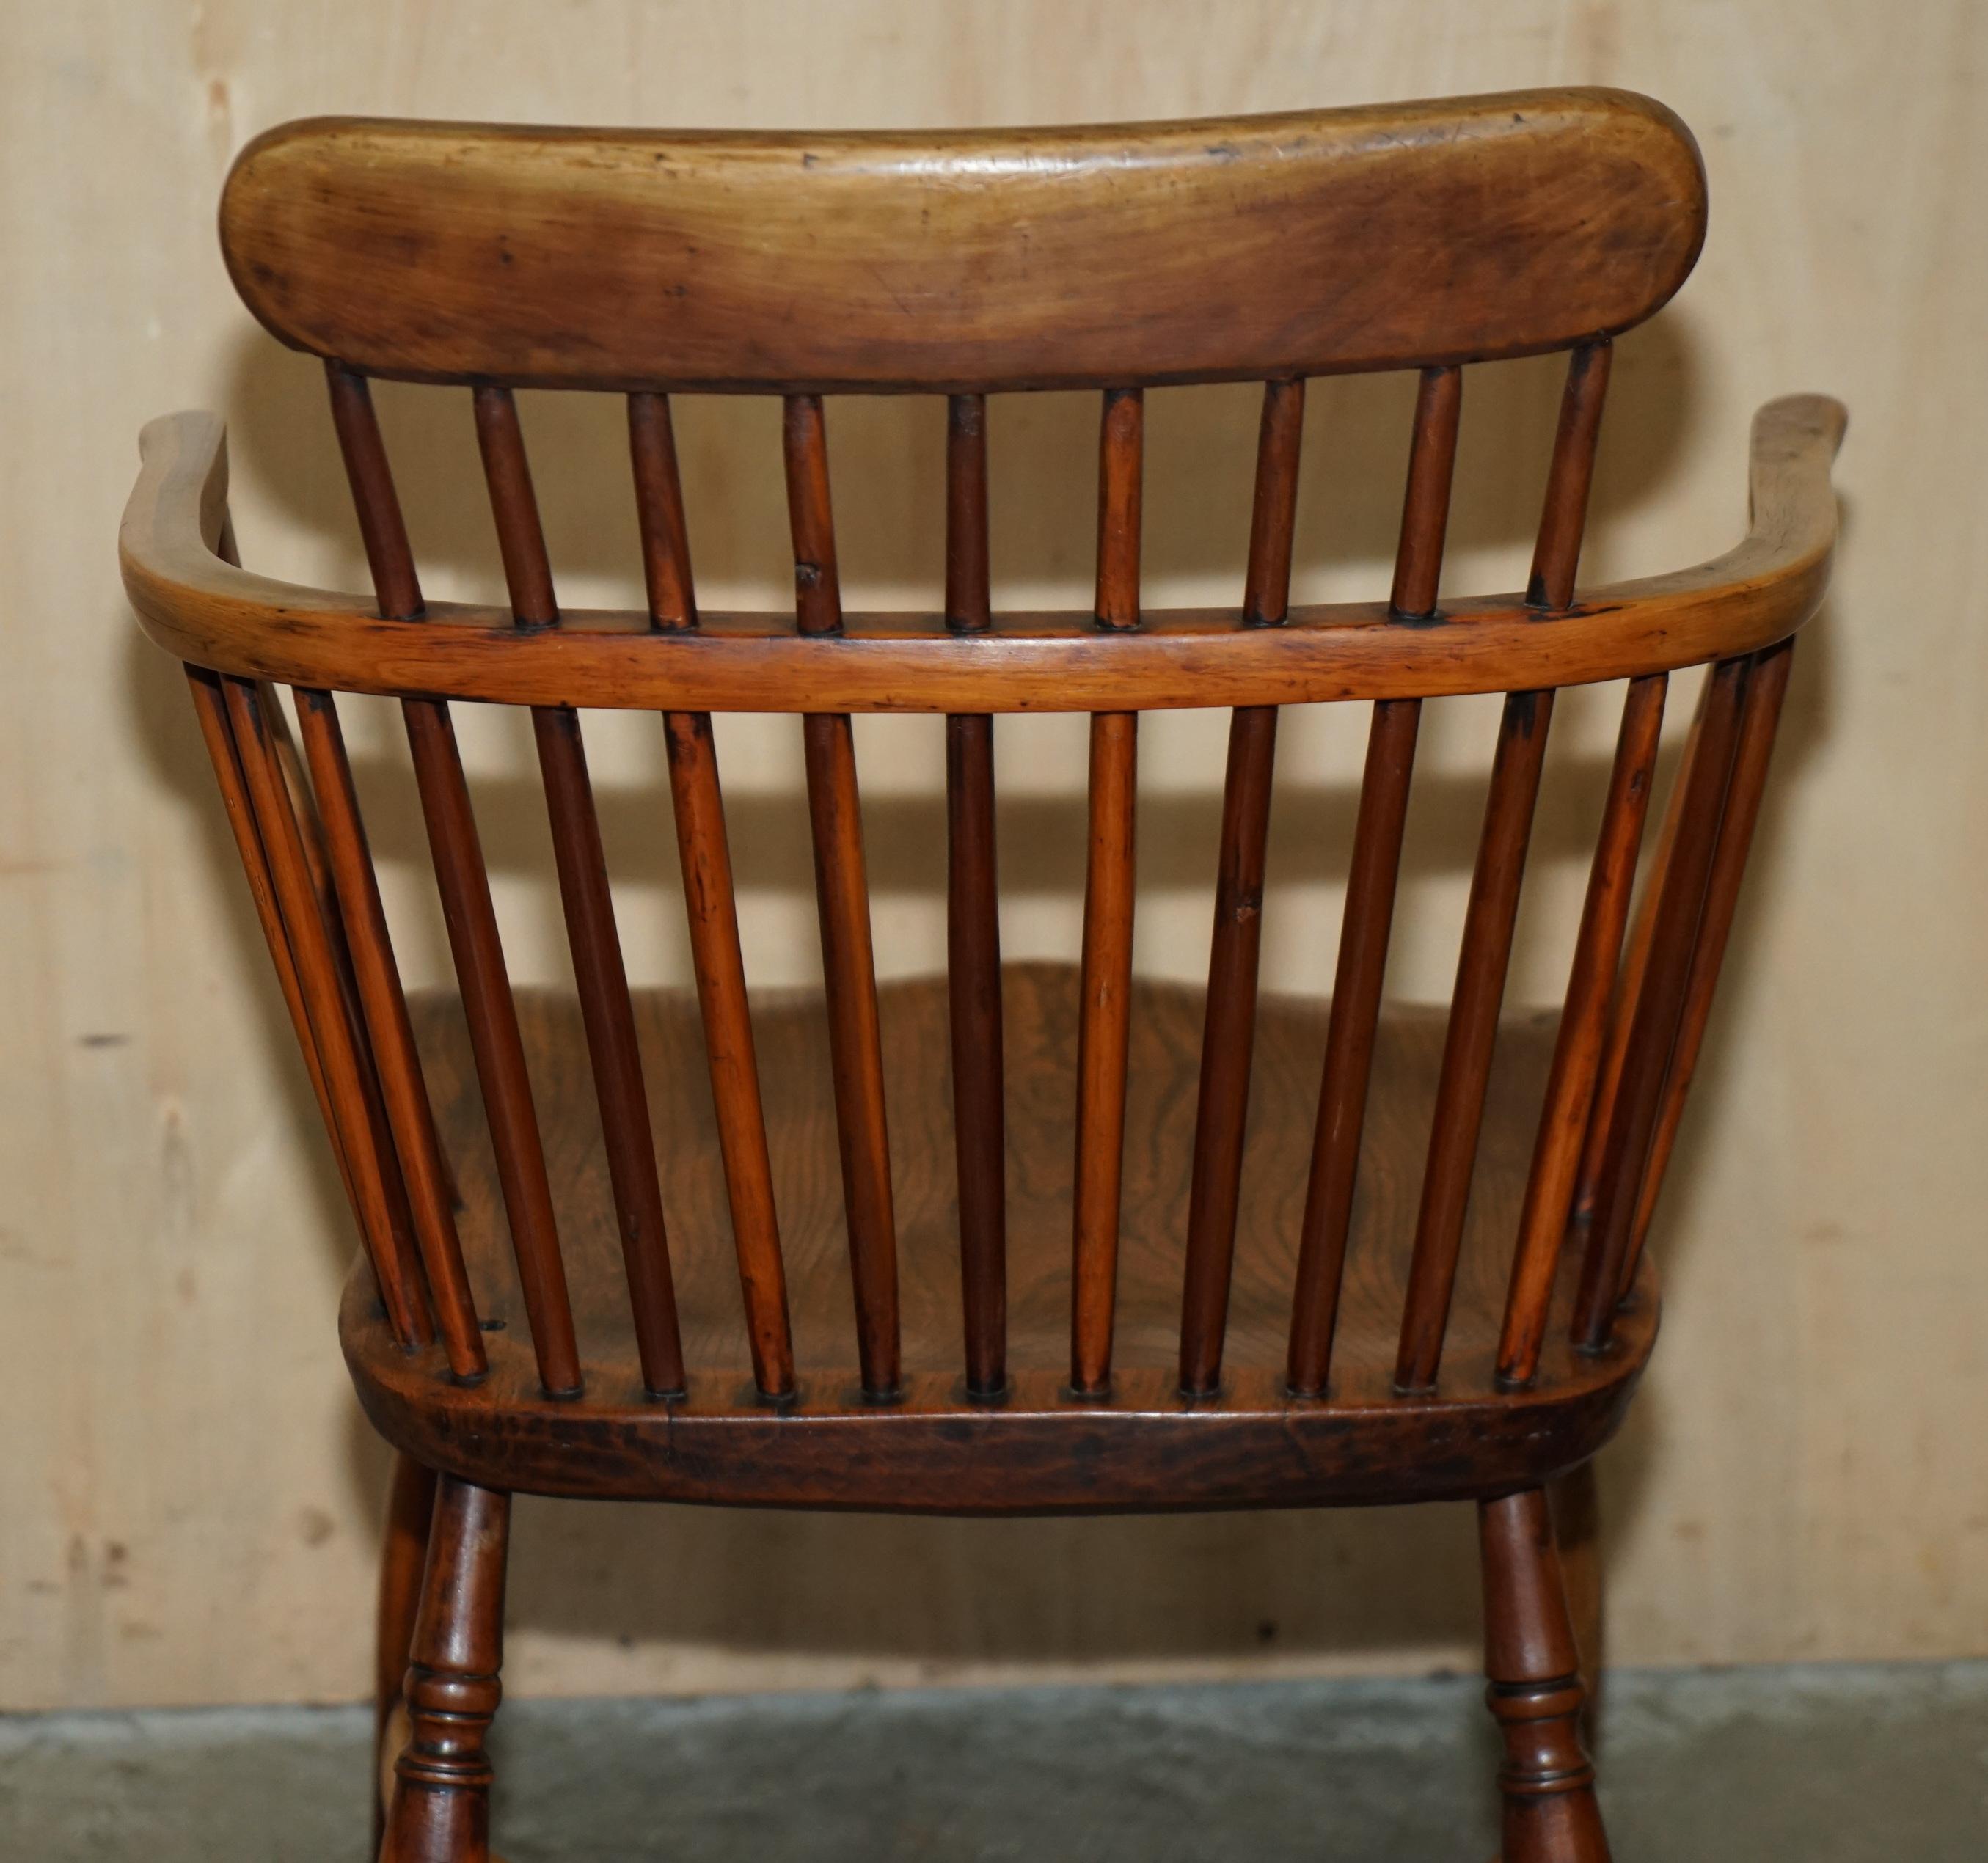 FINE ANTiQUE EARLY 19TH CENTURY BURR YEW WOOD & ELM COMB BACK WINDSOR ARMCHAIR For Sale 8